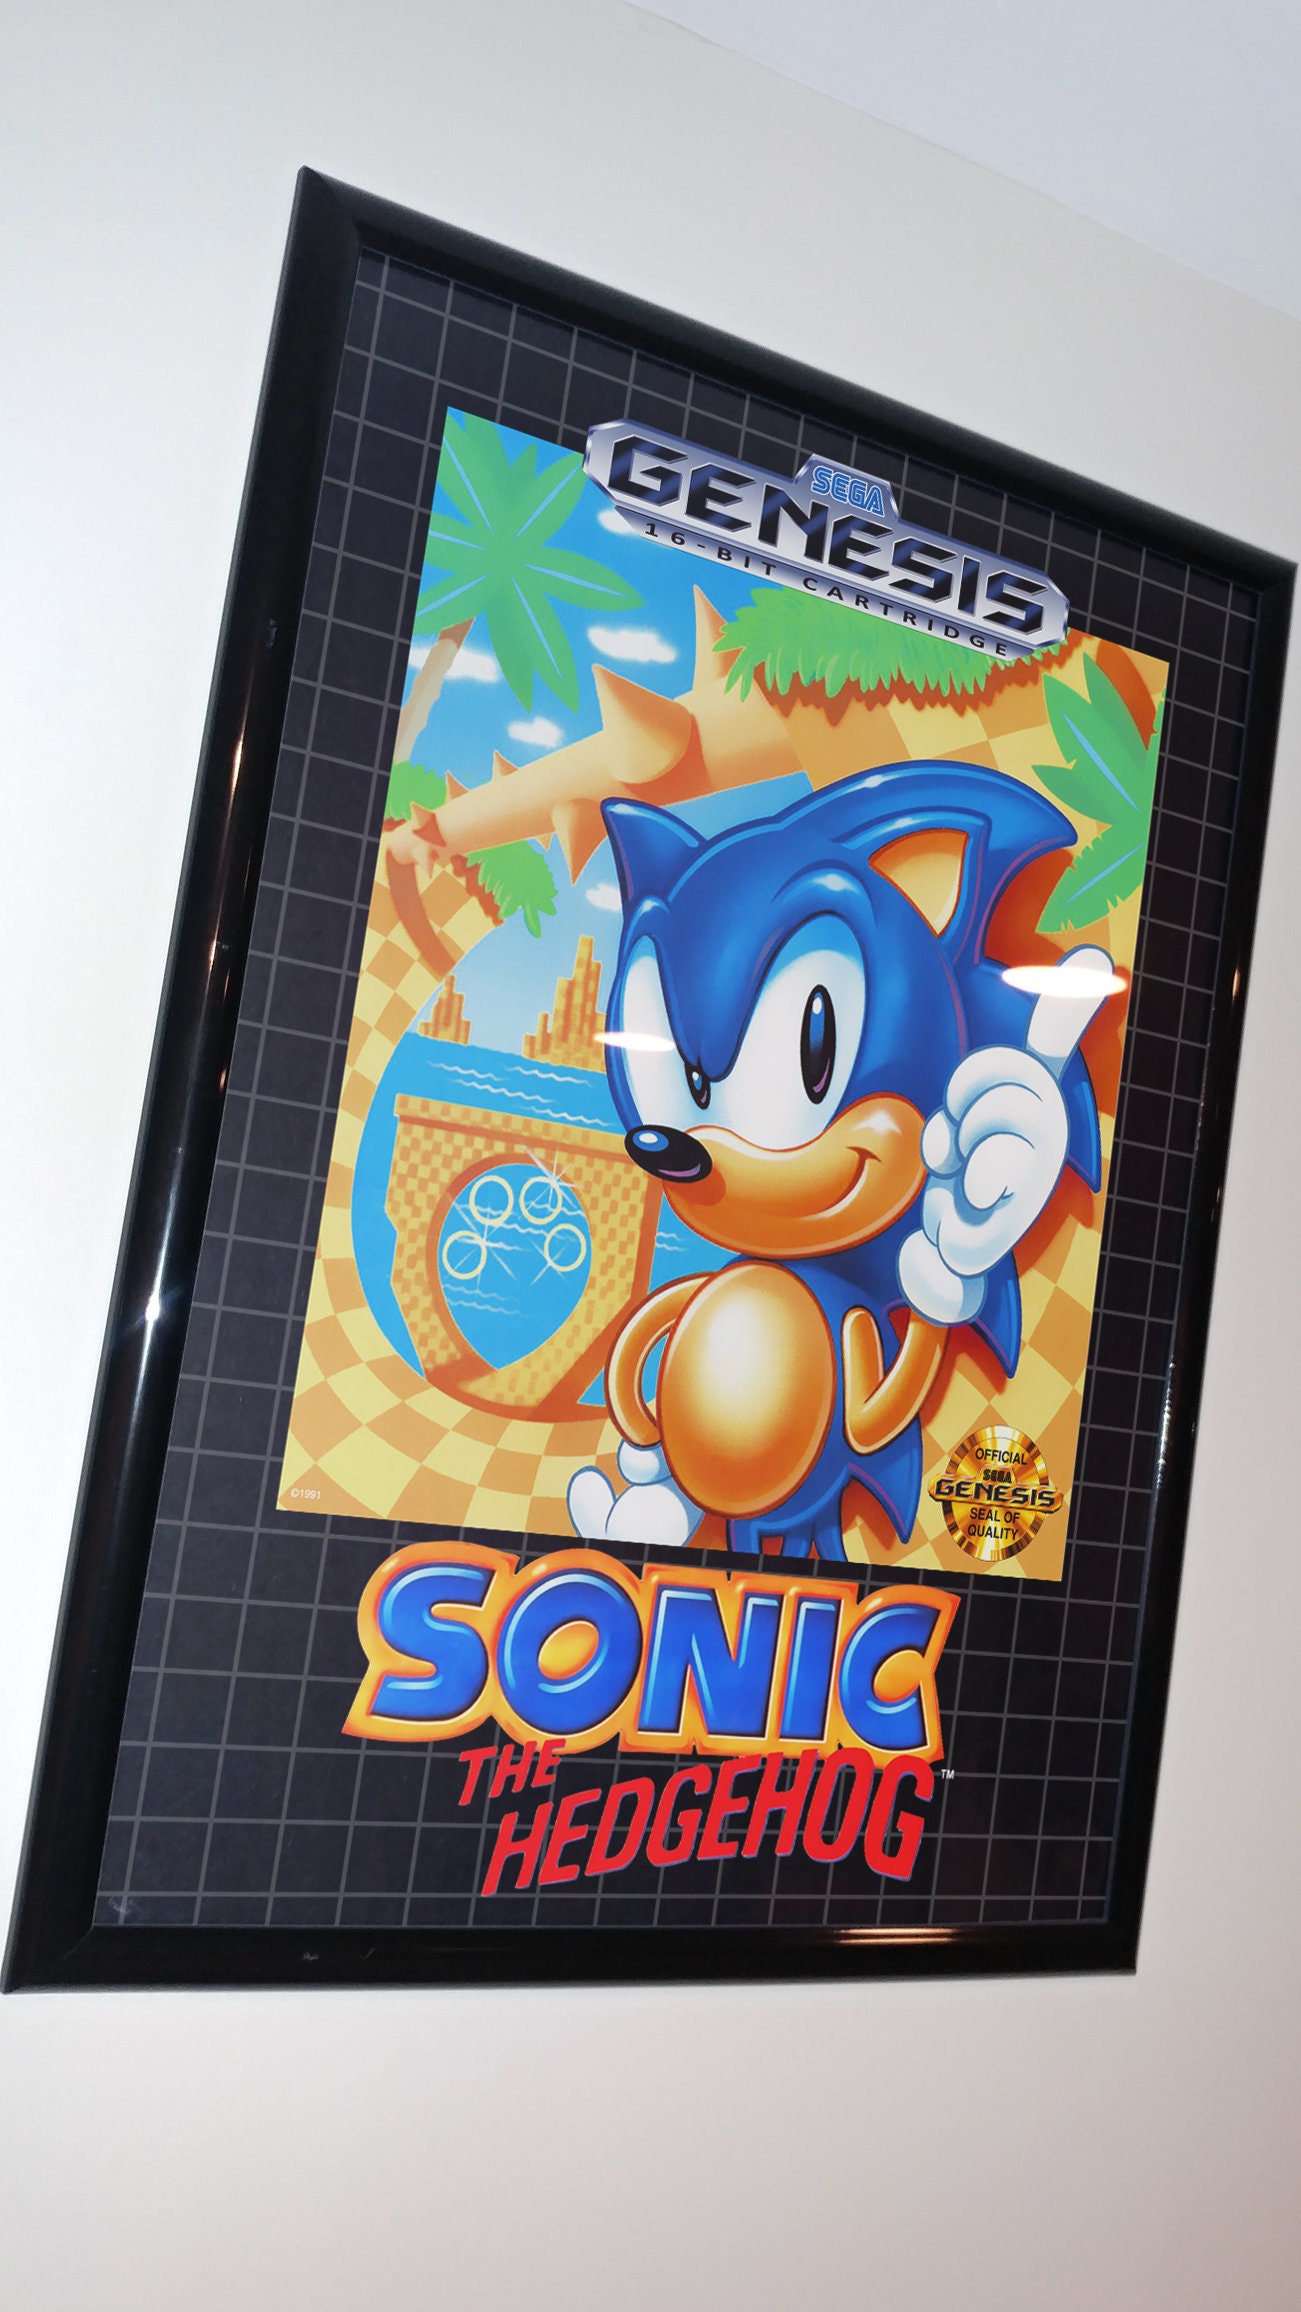 Sonic The Hedgehog 3 Poster sold by Rayshell Parallel | SKU 24536699 |  Printerval